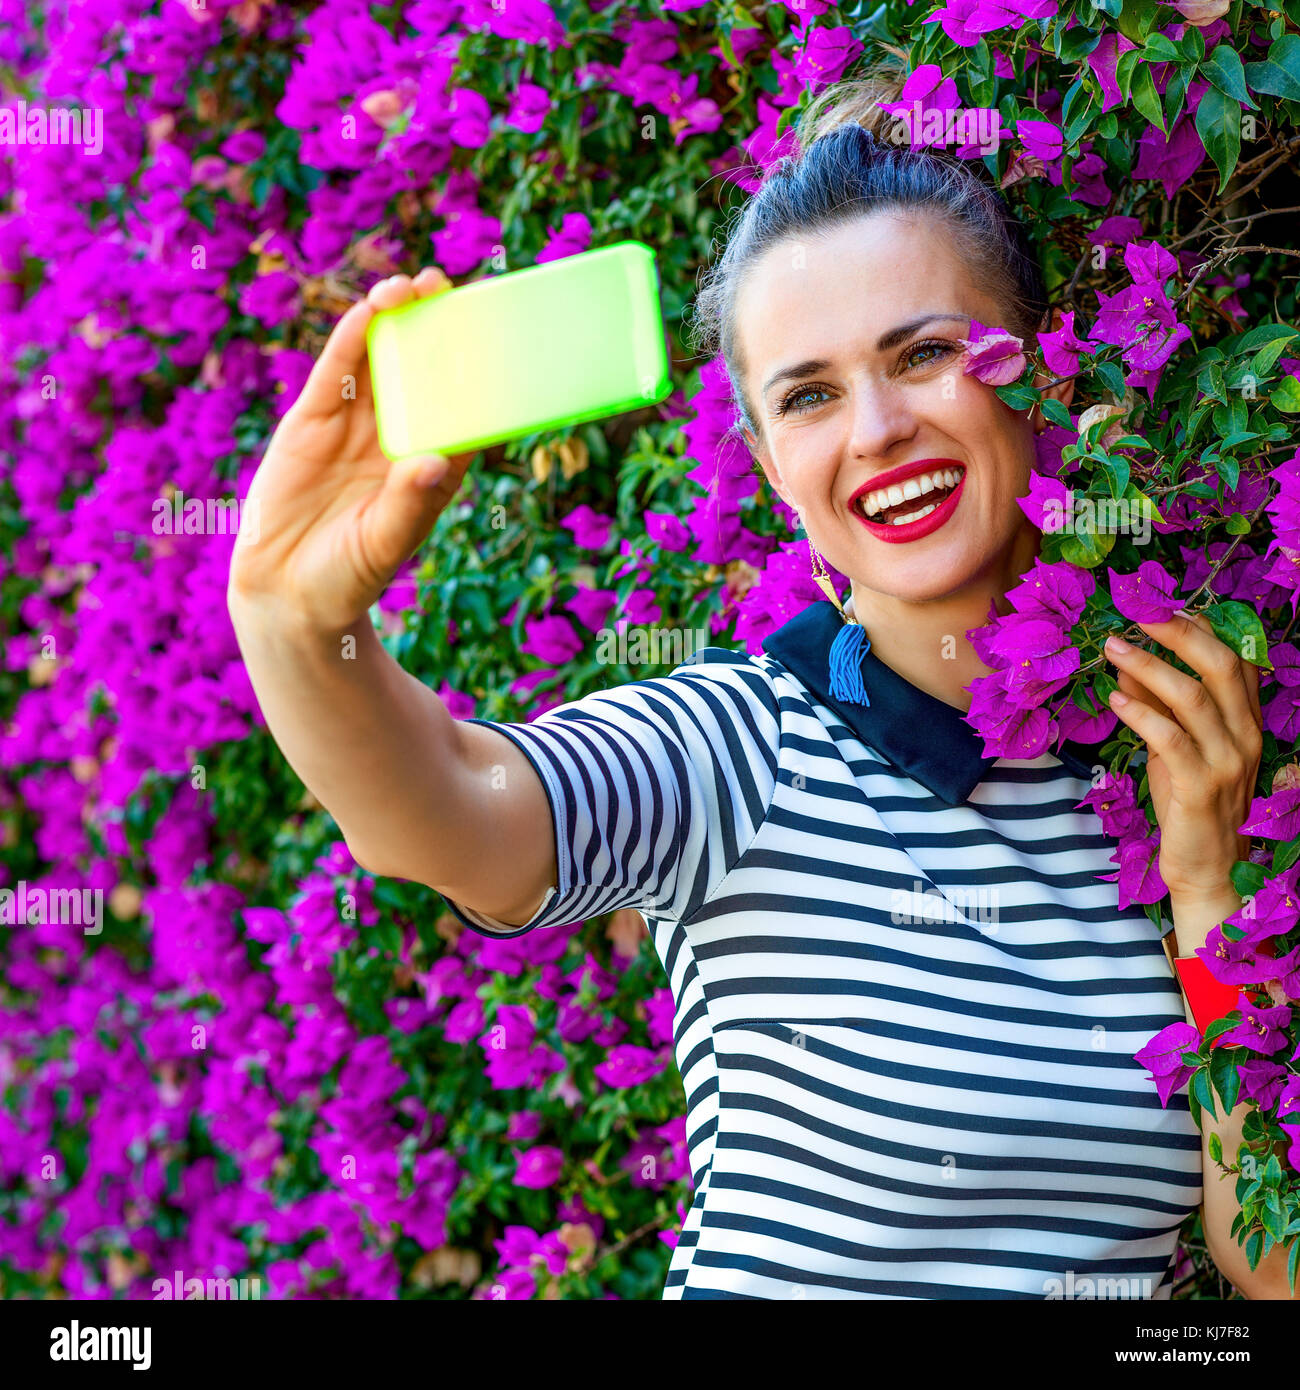 Colorful Freshness. smiling stylish woman in yellow shorts and stripy shirt near colorful magenta flowers bed with phone taking selfie Stock Photo